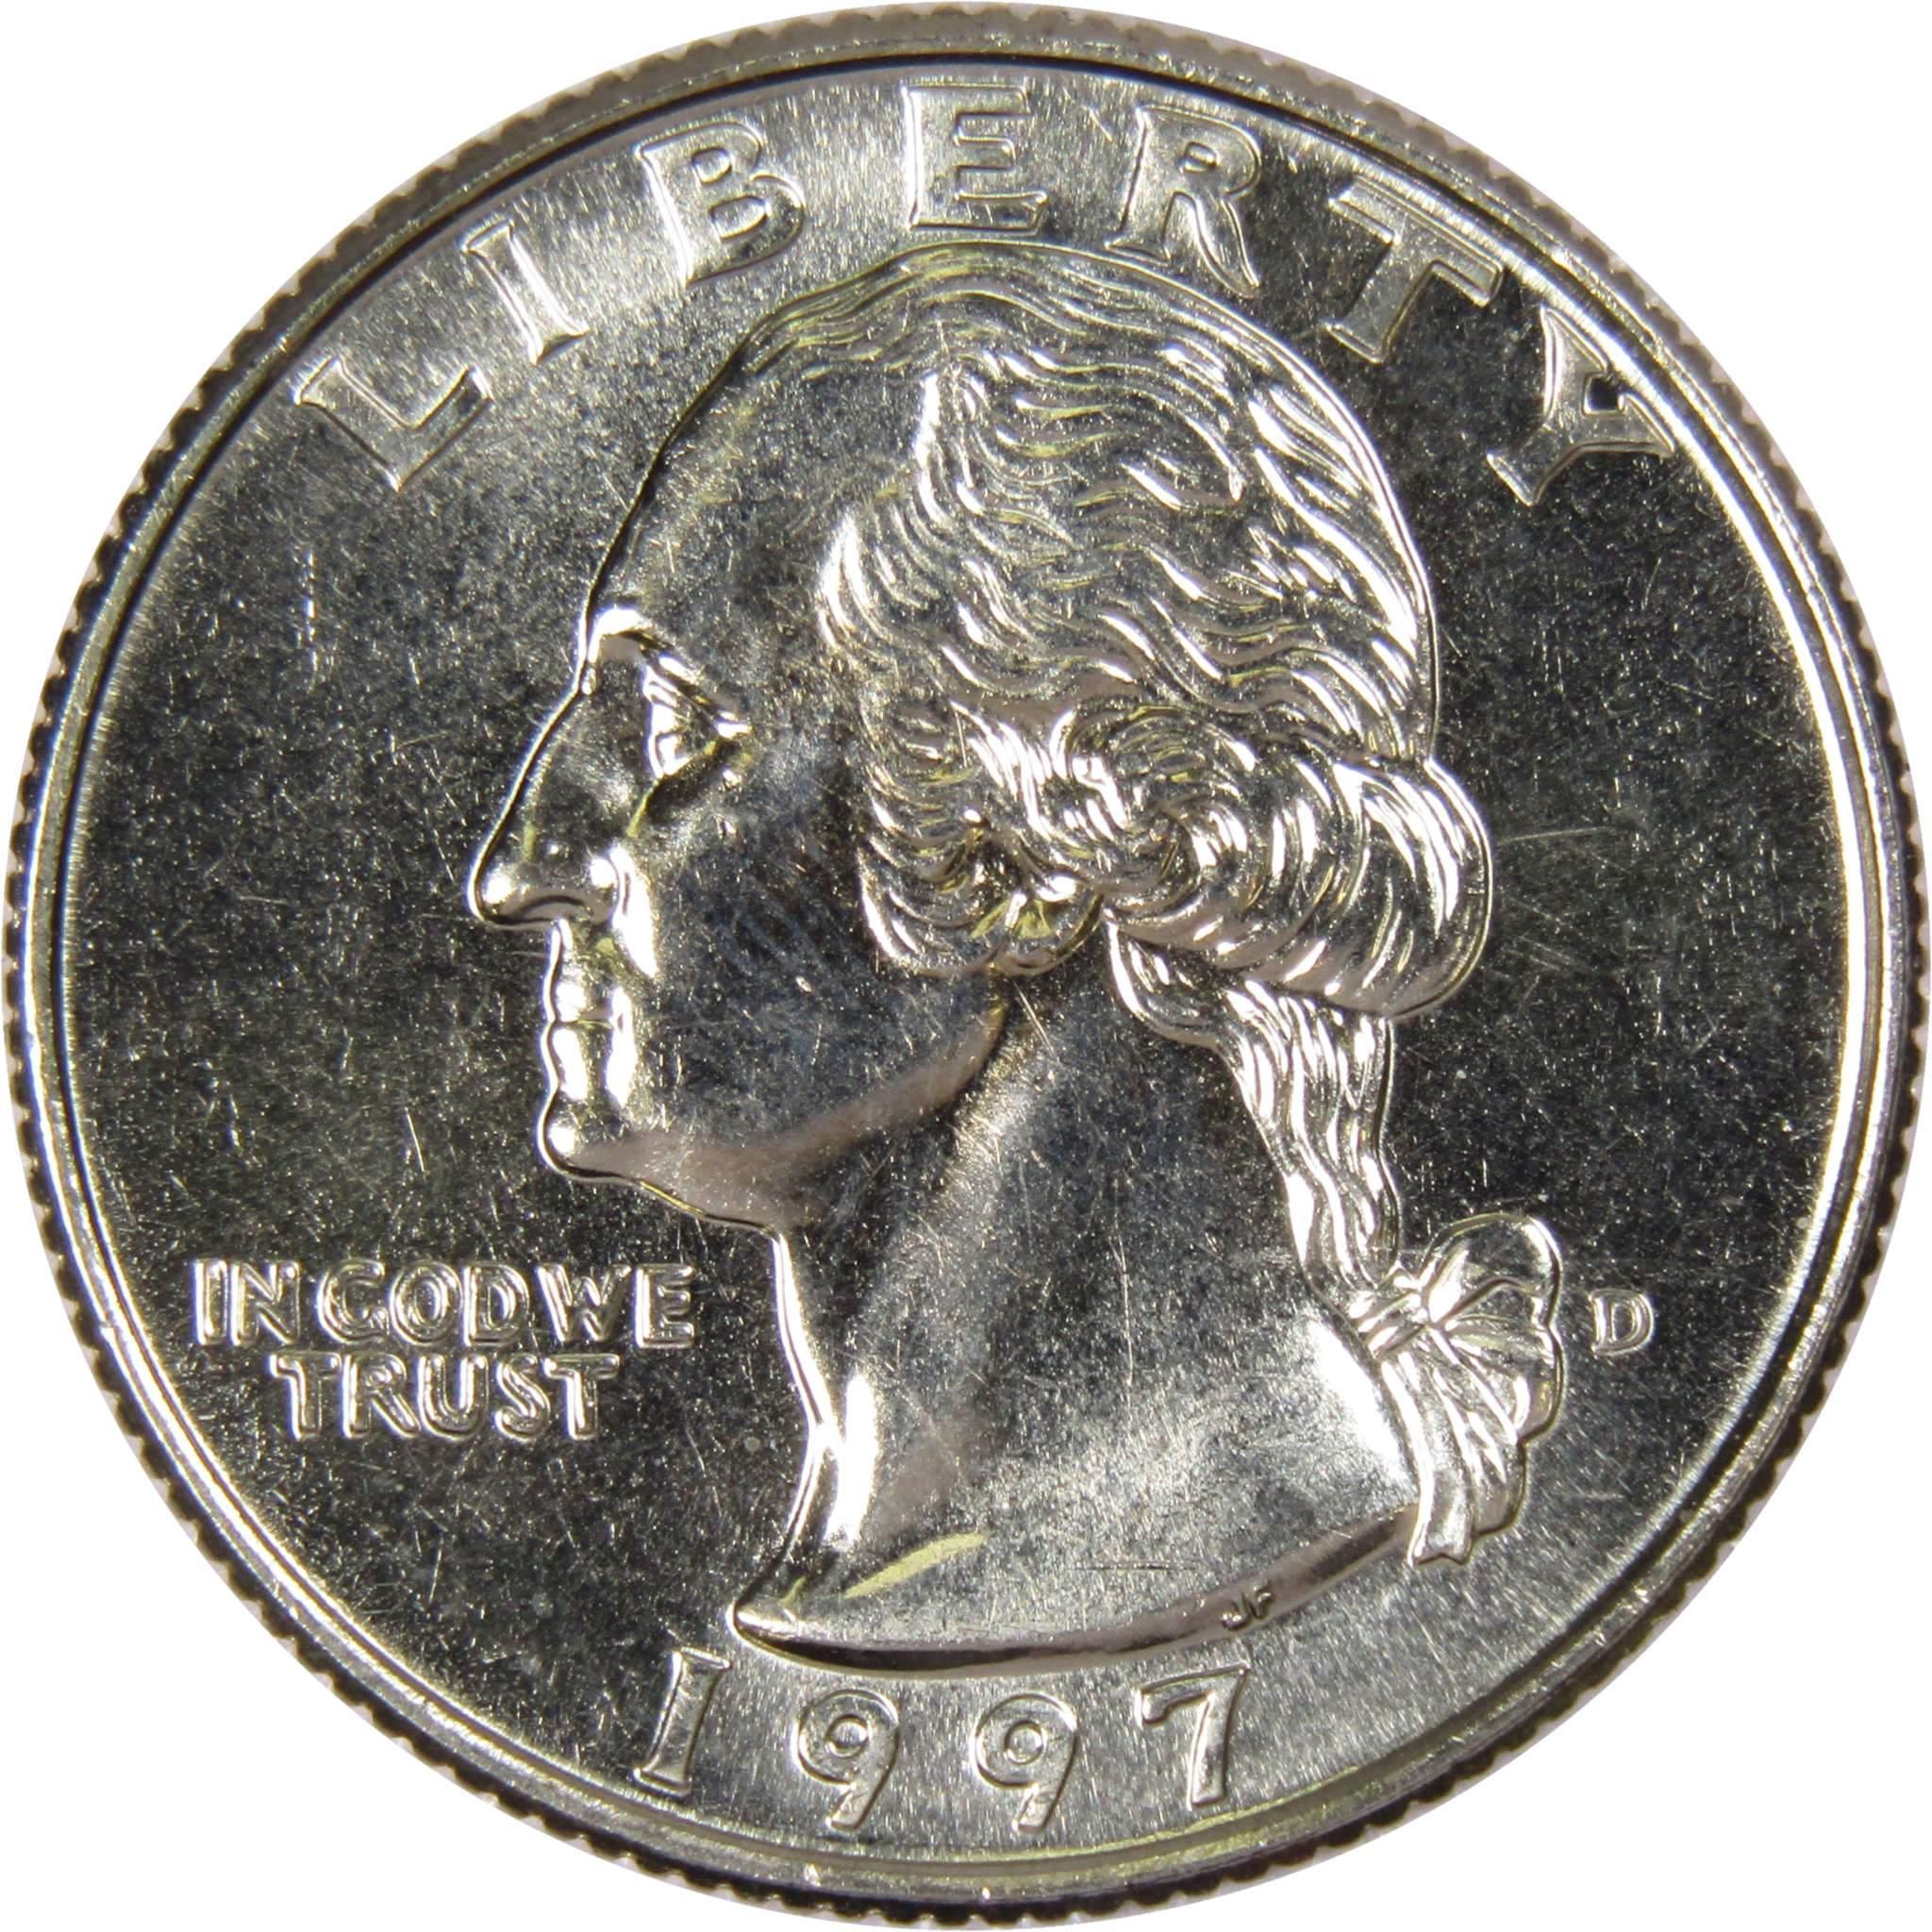 1997 D Washington Quarter BU Uncirculated Mint State 25c US Coin Collectible